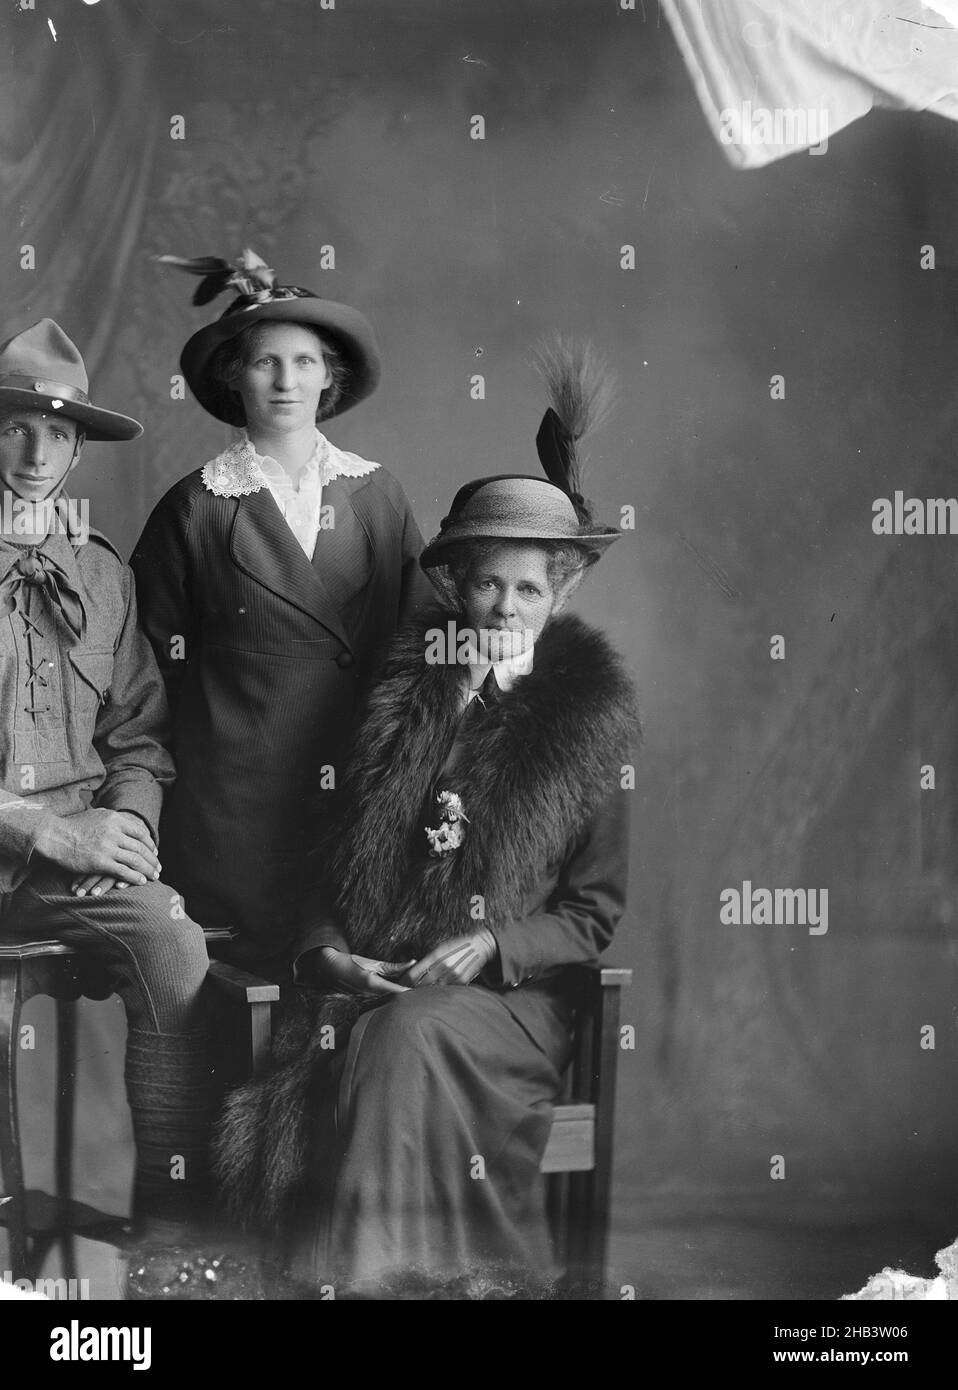 Thomas Henry Mossman, Esther Muriel Mossman and Marion Susan Mossman, Berry & Co, photography studio, 1914, Wellington, black-and-white photography, The man in this portrait is Thomas Henry Mossman,  service number 9/728  and the women are his sister Esther Muriel Mossman (standing) and his stepmother Marion Susan Mossman Stock Photo